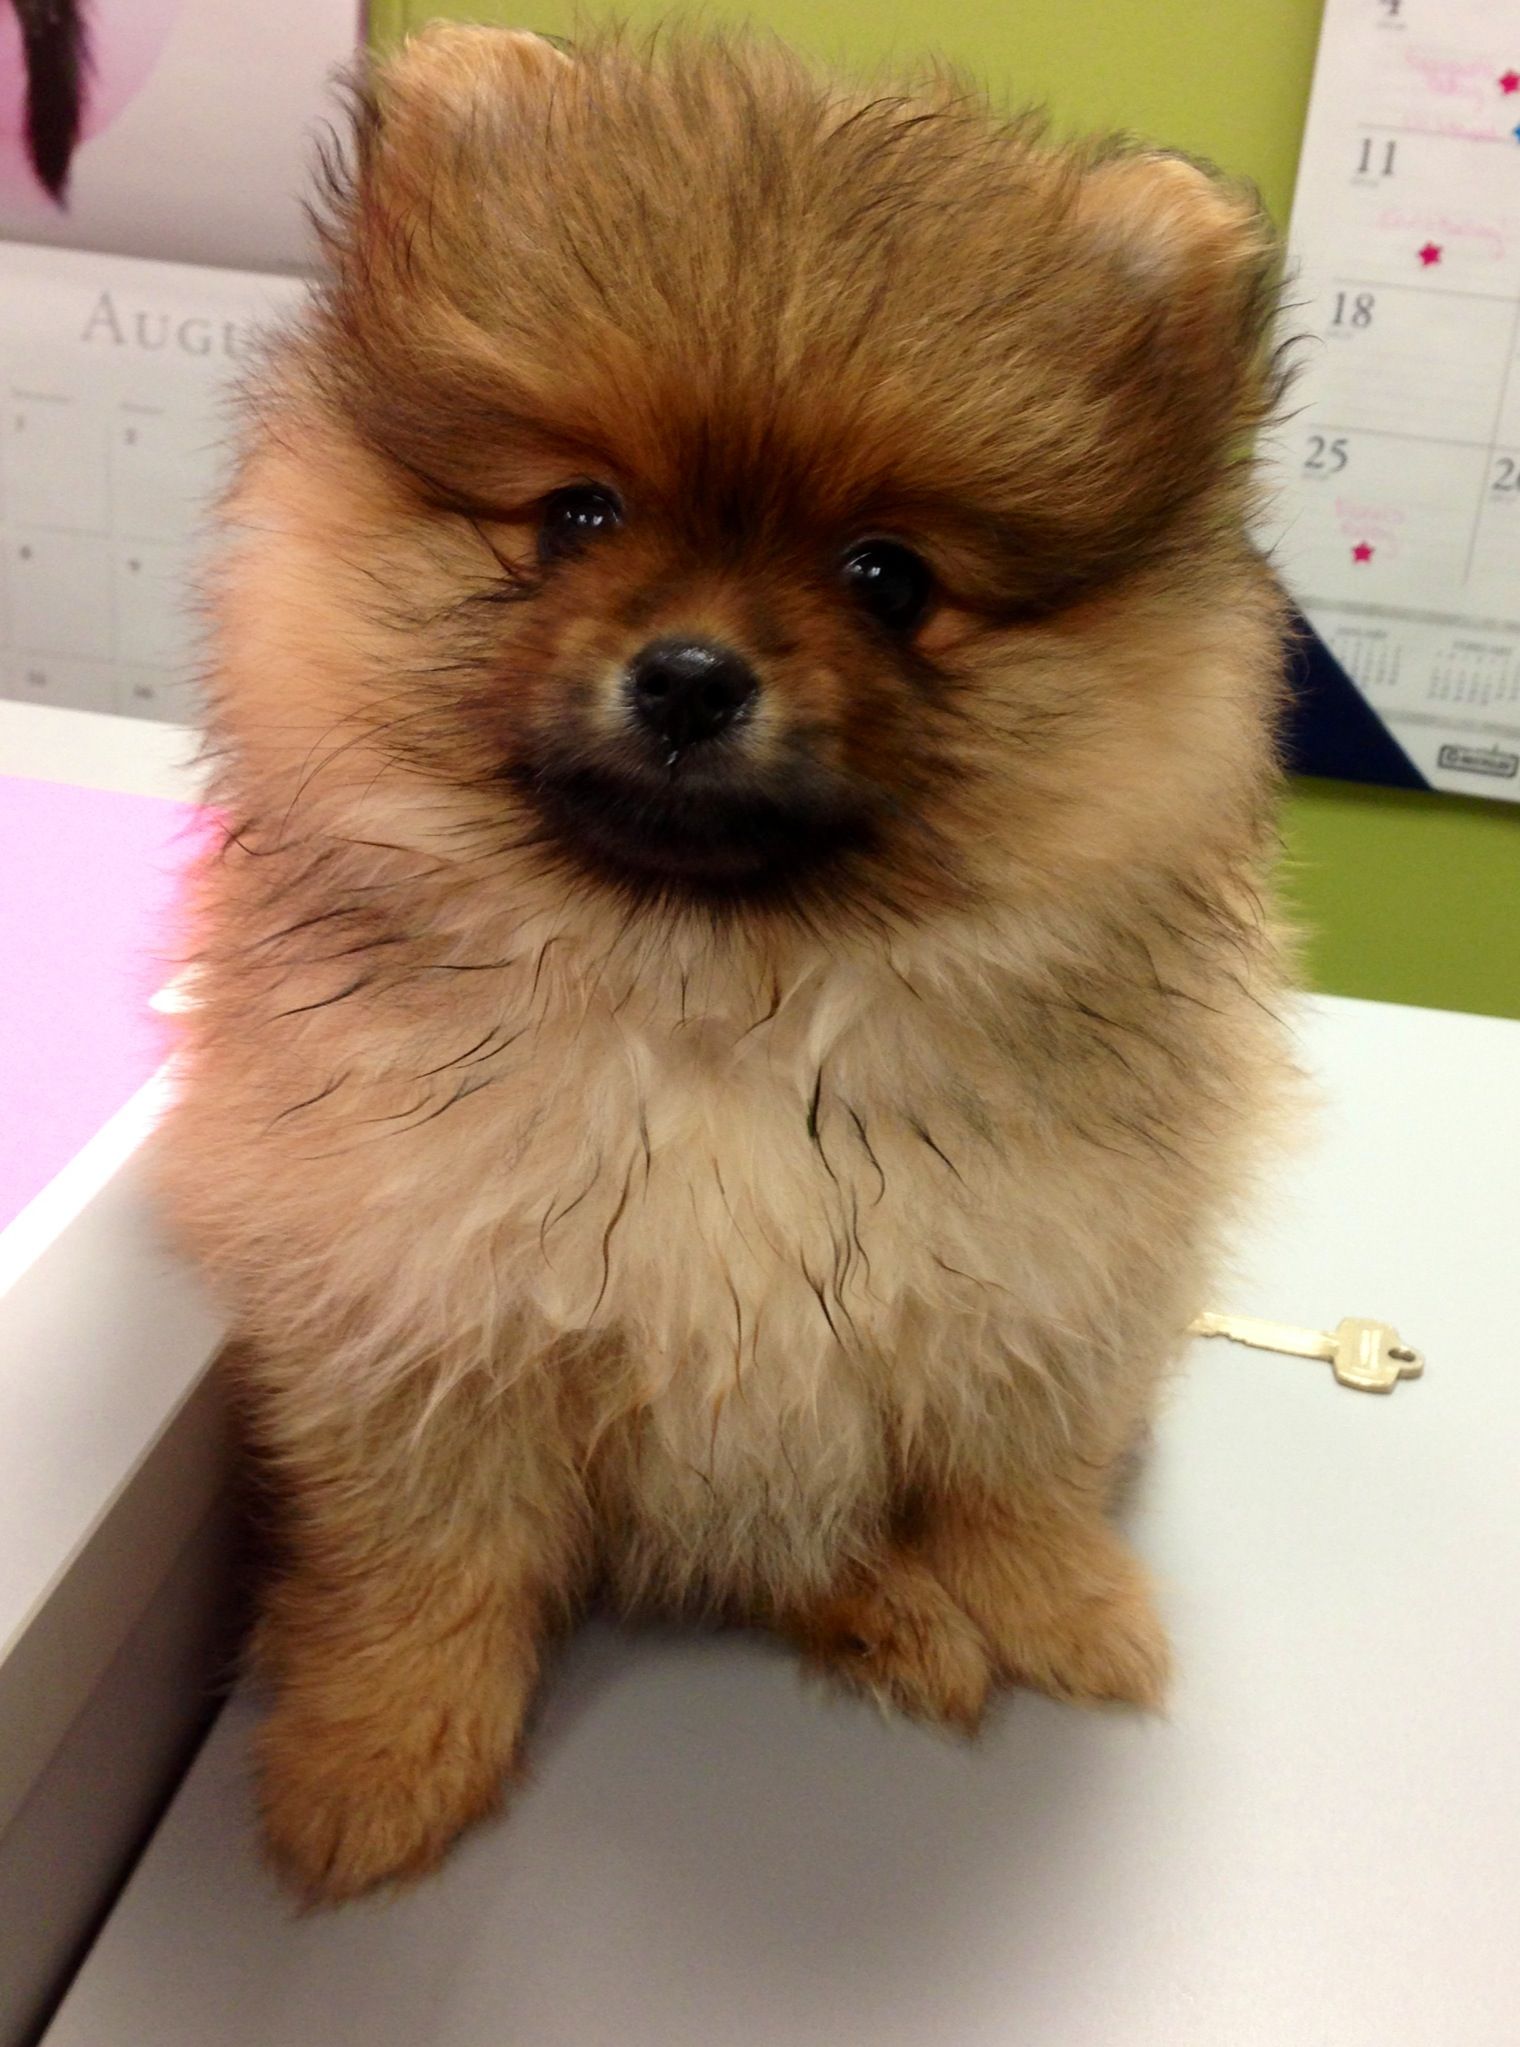 Beautifulpomeranian puppies for sale.text or call